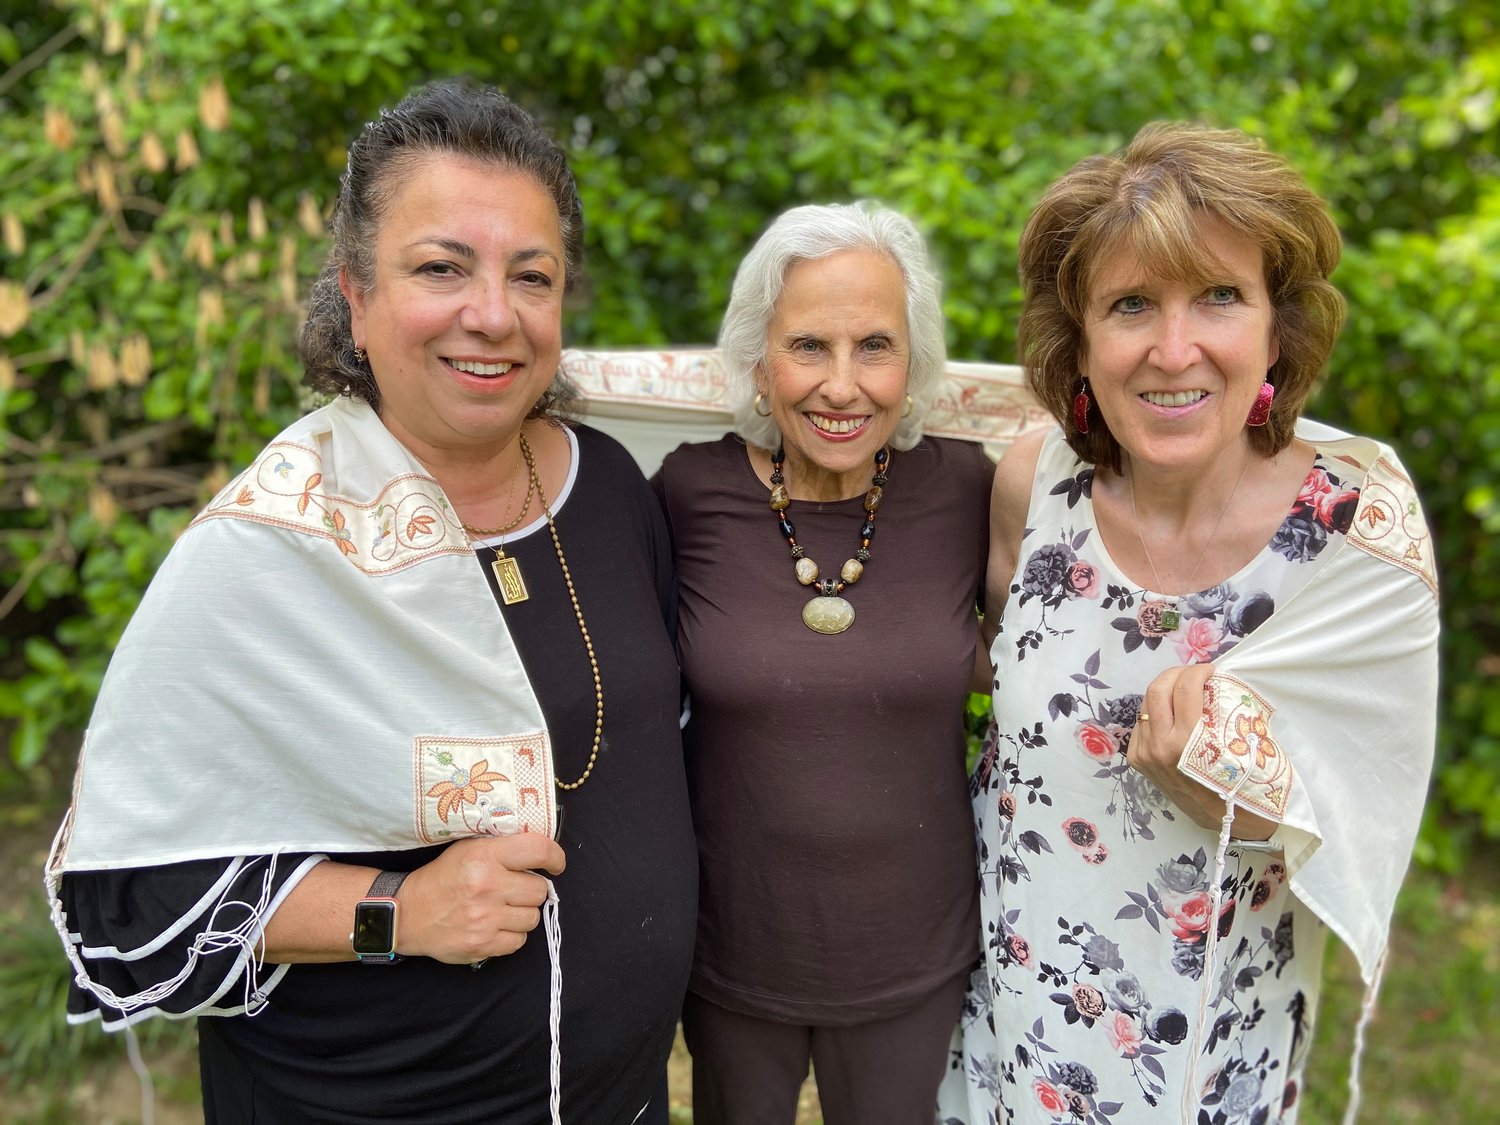 Mojdeh Hassani, left, Fredda Klopfer and Lisa Larsen Hill have become friends through Seeds of Faith for Women.